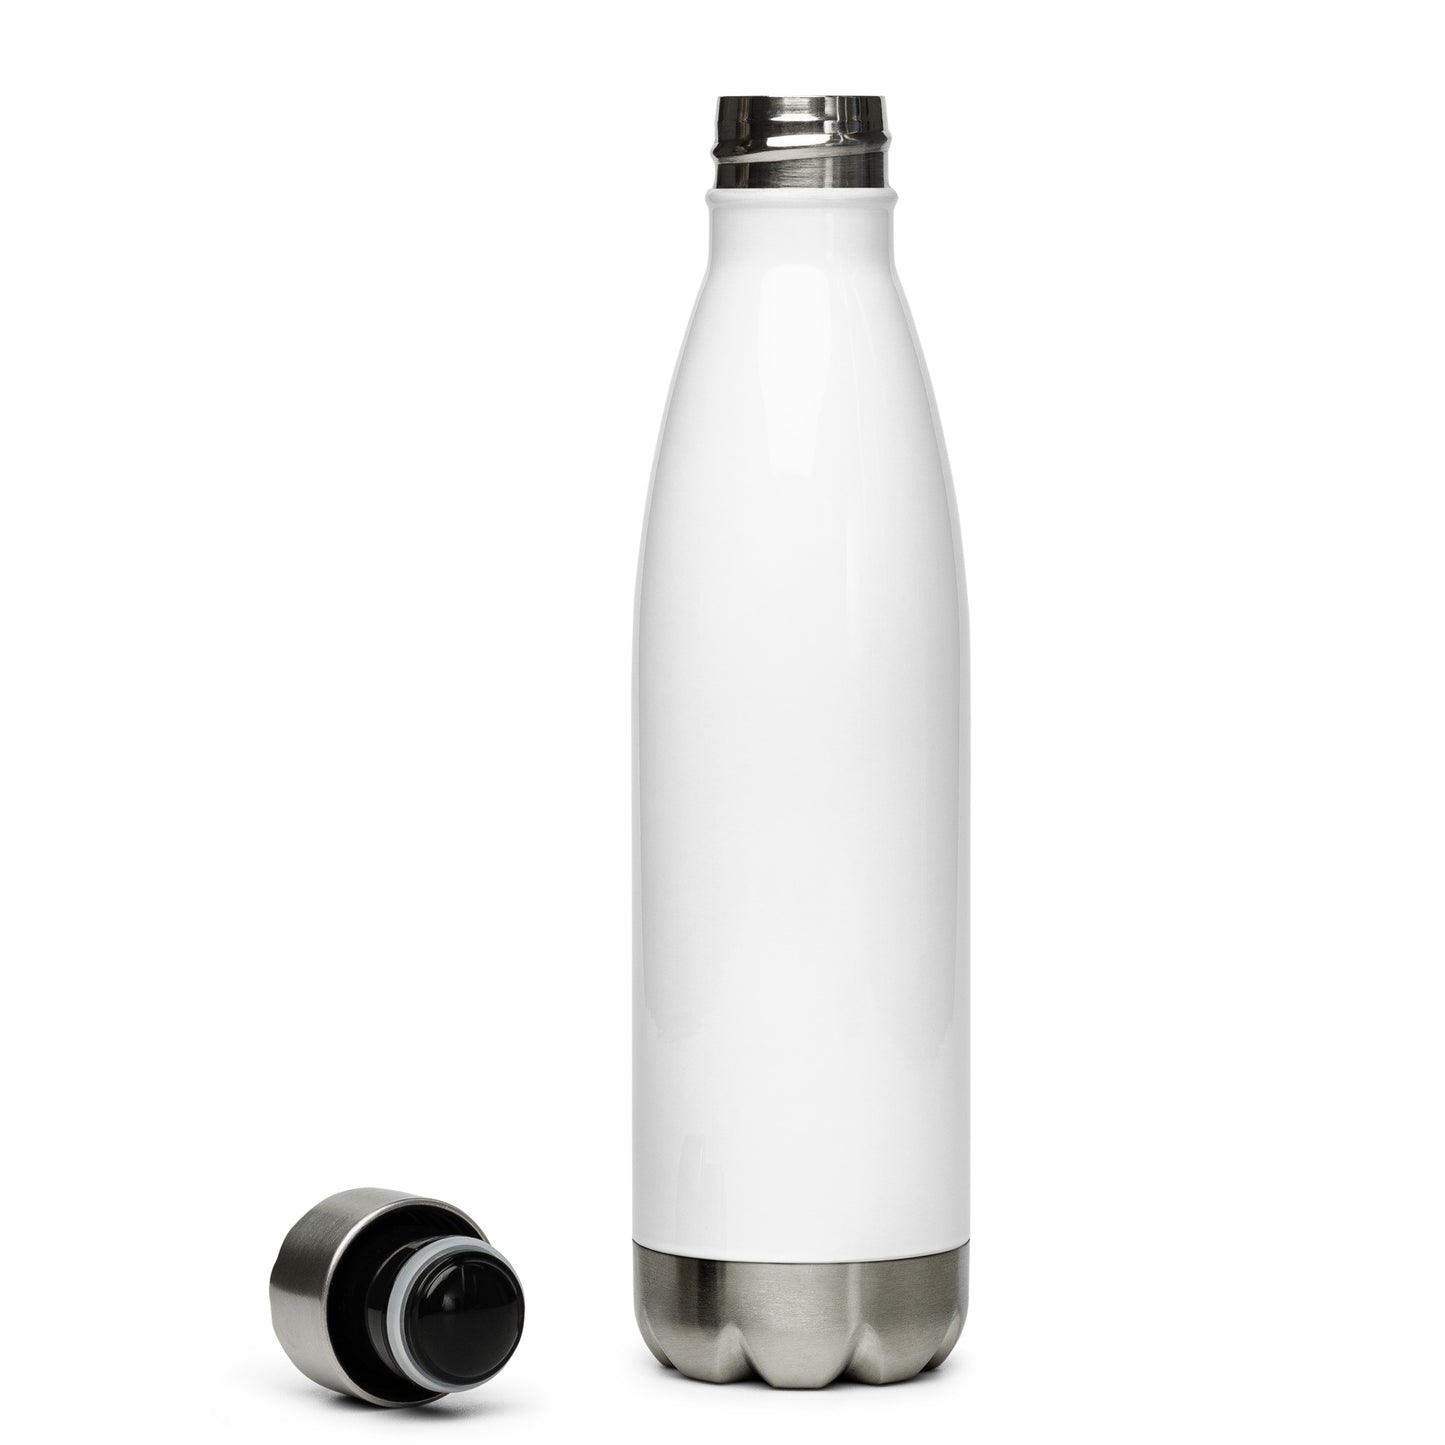 I Live for Astrology Stainless Steel Water Bottle